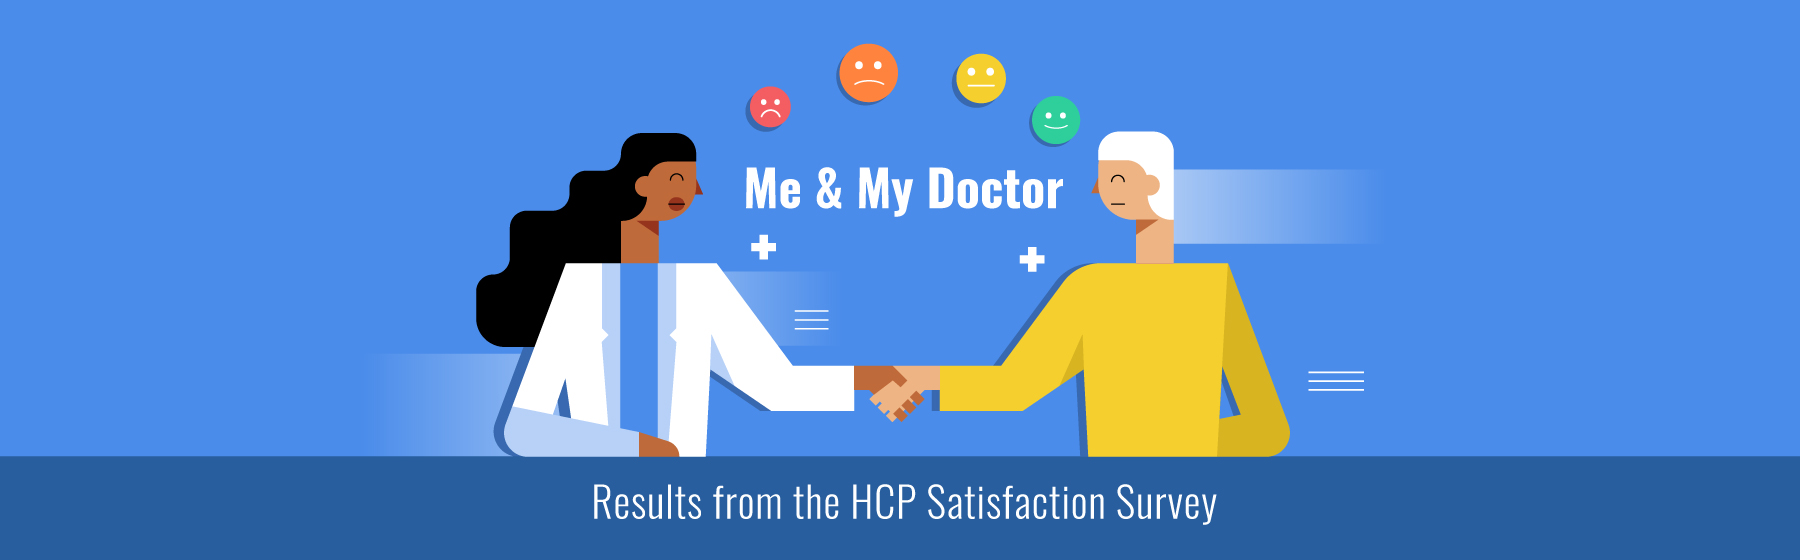 Results from HCP Satisfaction Survey between cancer patients and autoimmune patients